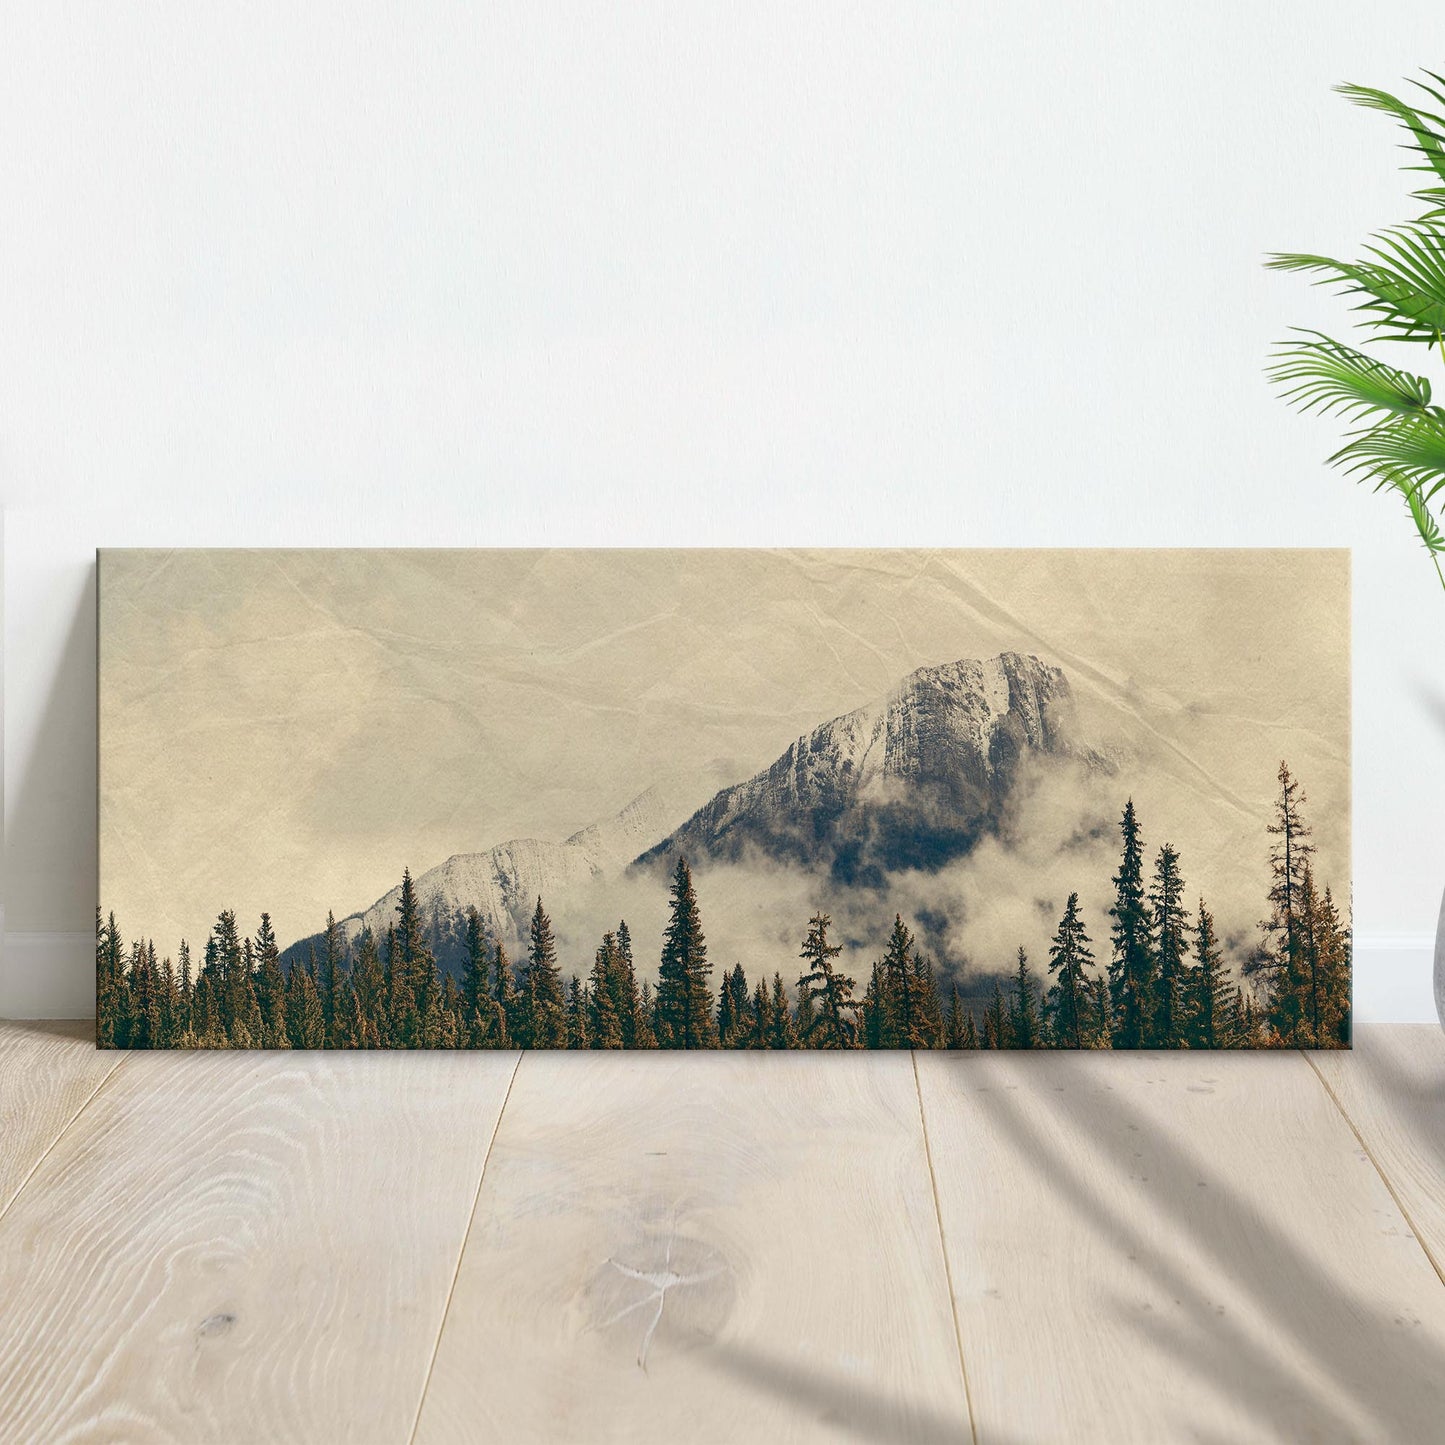 Banff National Park Canvas Wall Art - Image by Tailored Canvases